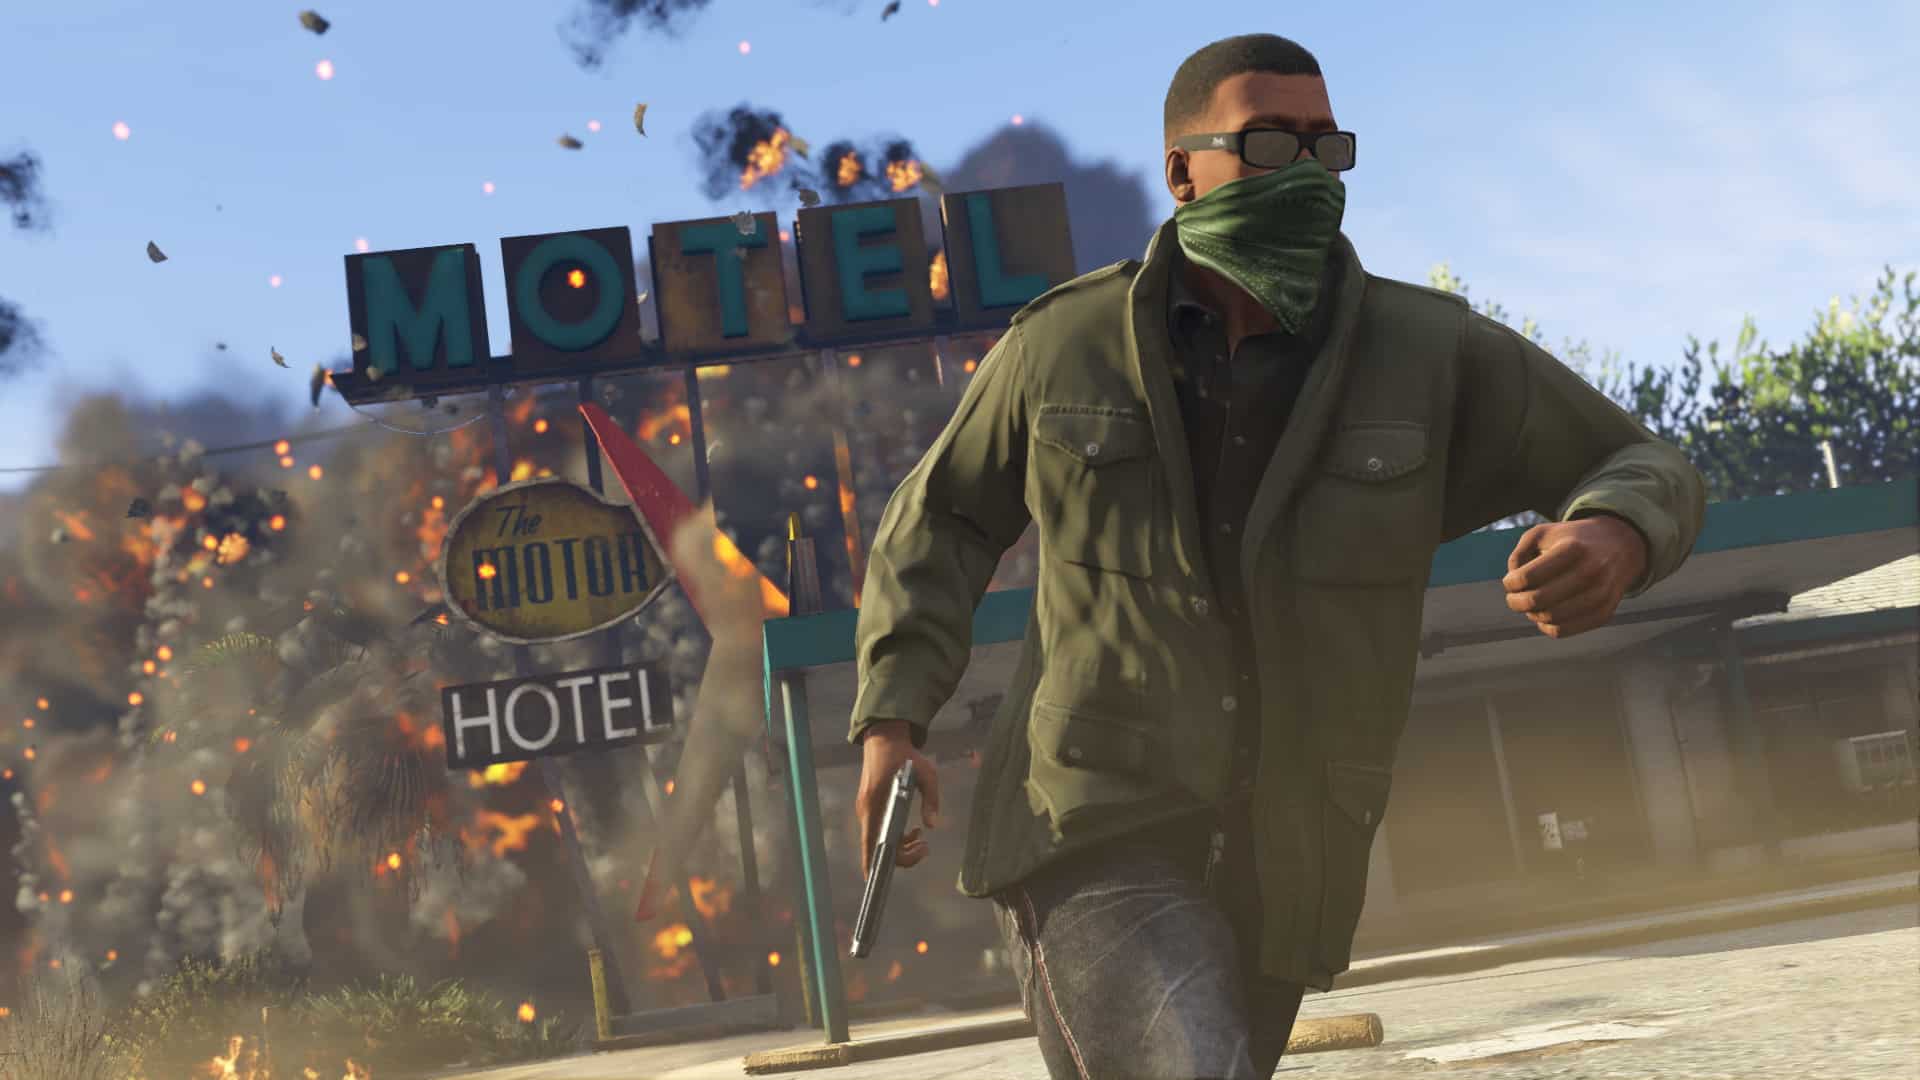 How to GTA V roleplay, who to watch, and more - Charlie INTEL